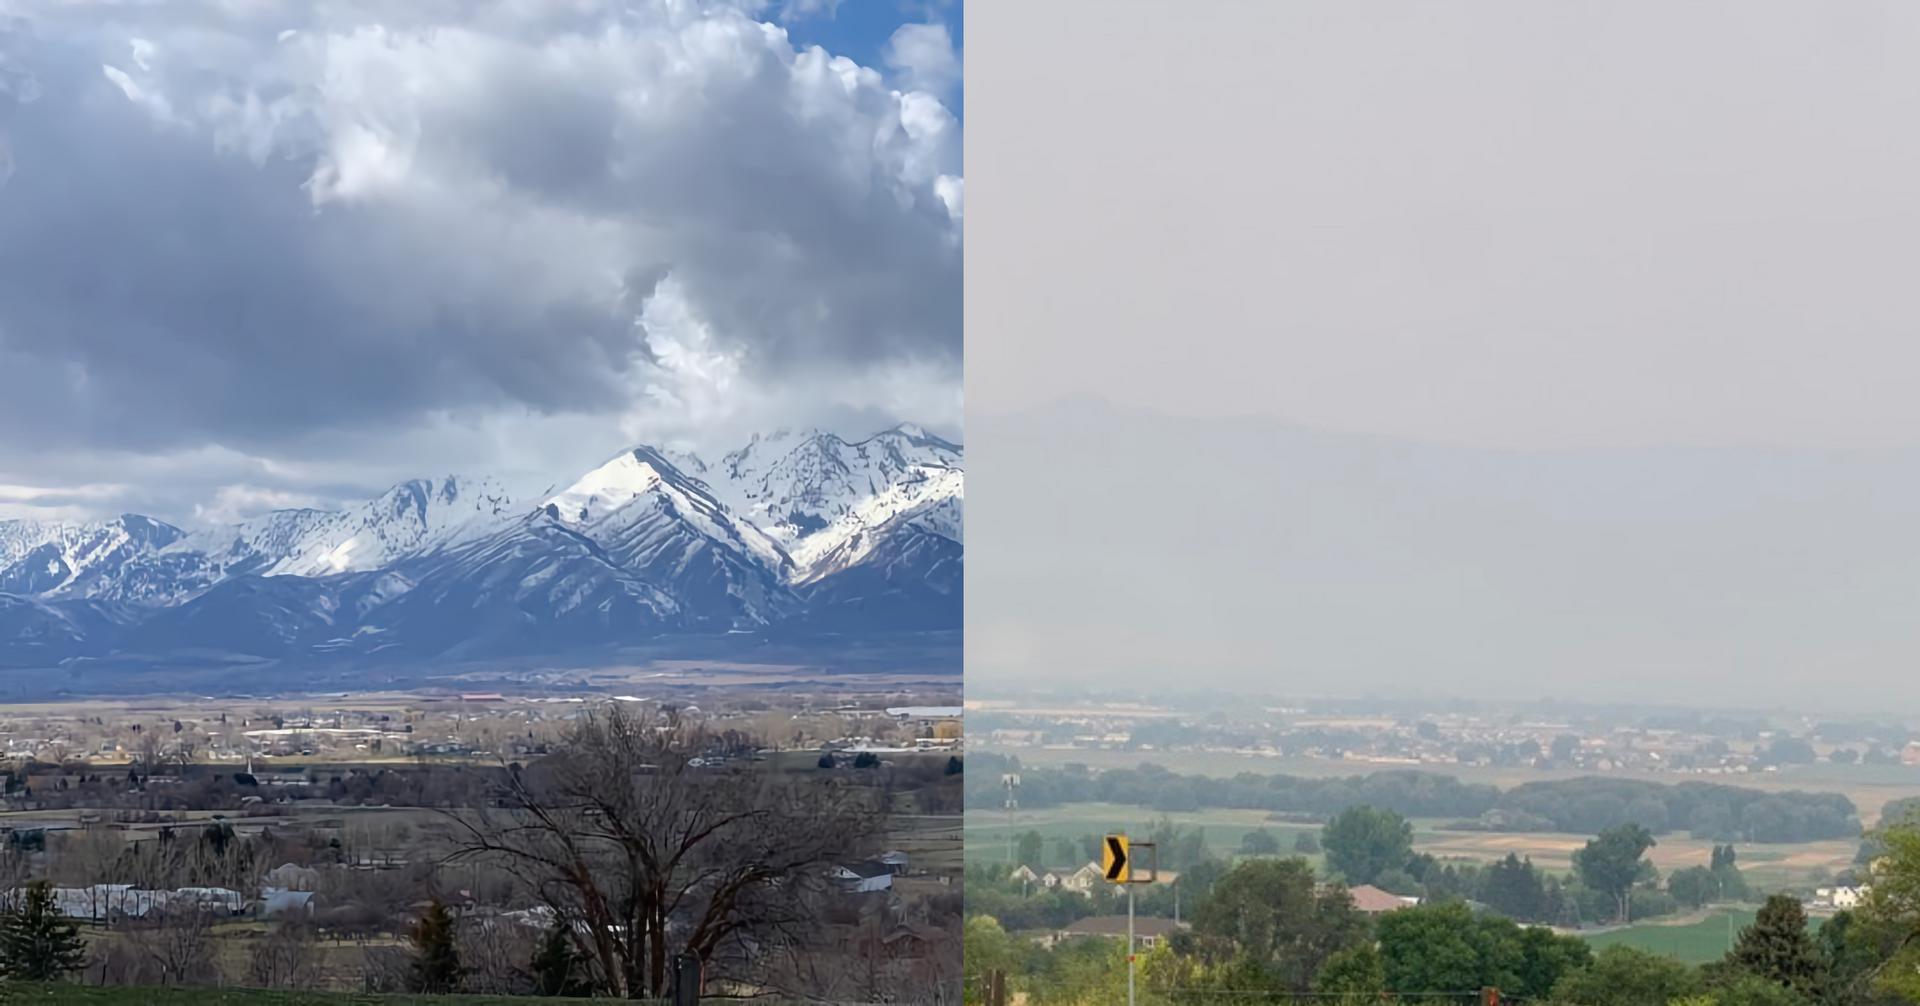 Comparison of Wellville mountains before and during smoky days.